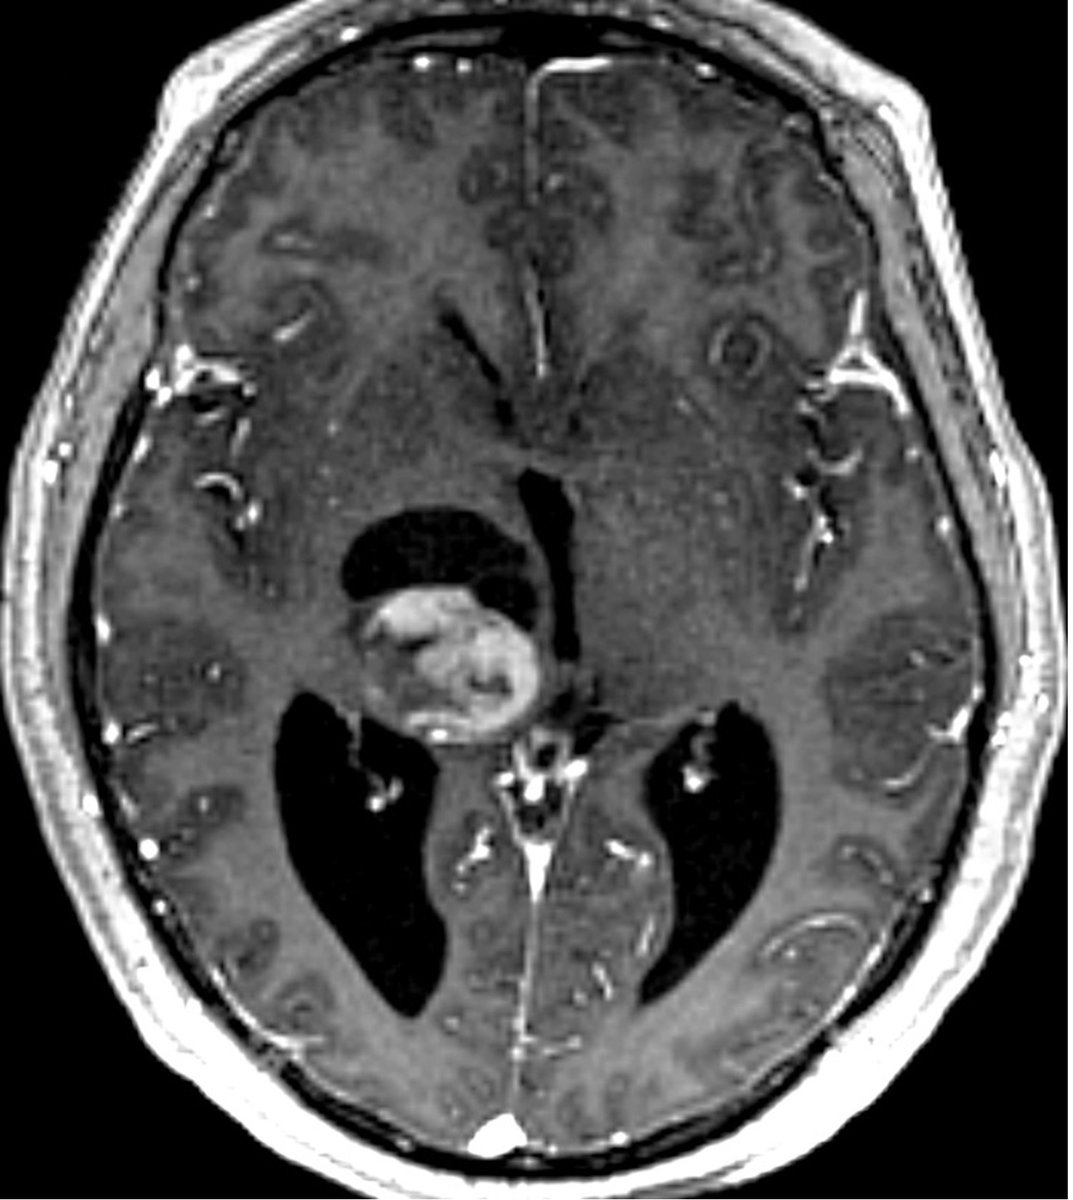 What tumor is shown in this image and how should it be treated? What are some considerations when evaluating surgical candidacy for tumors in this location? #MedTwitter #Neurosurgery #NSGY #surgery